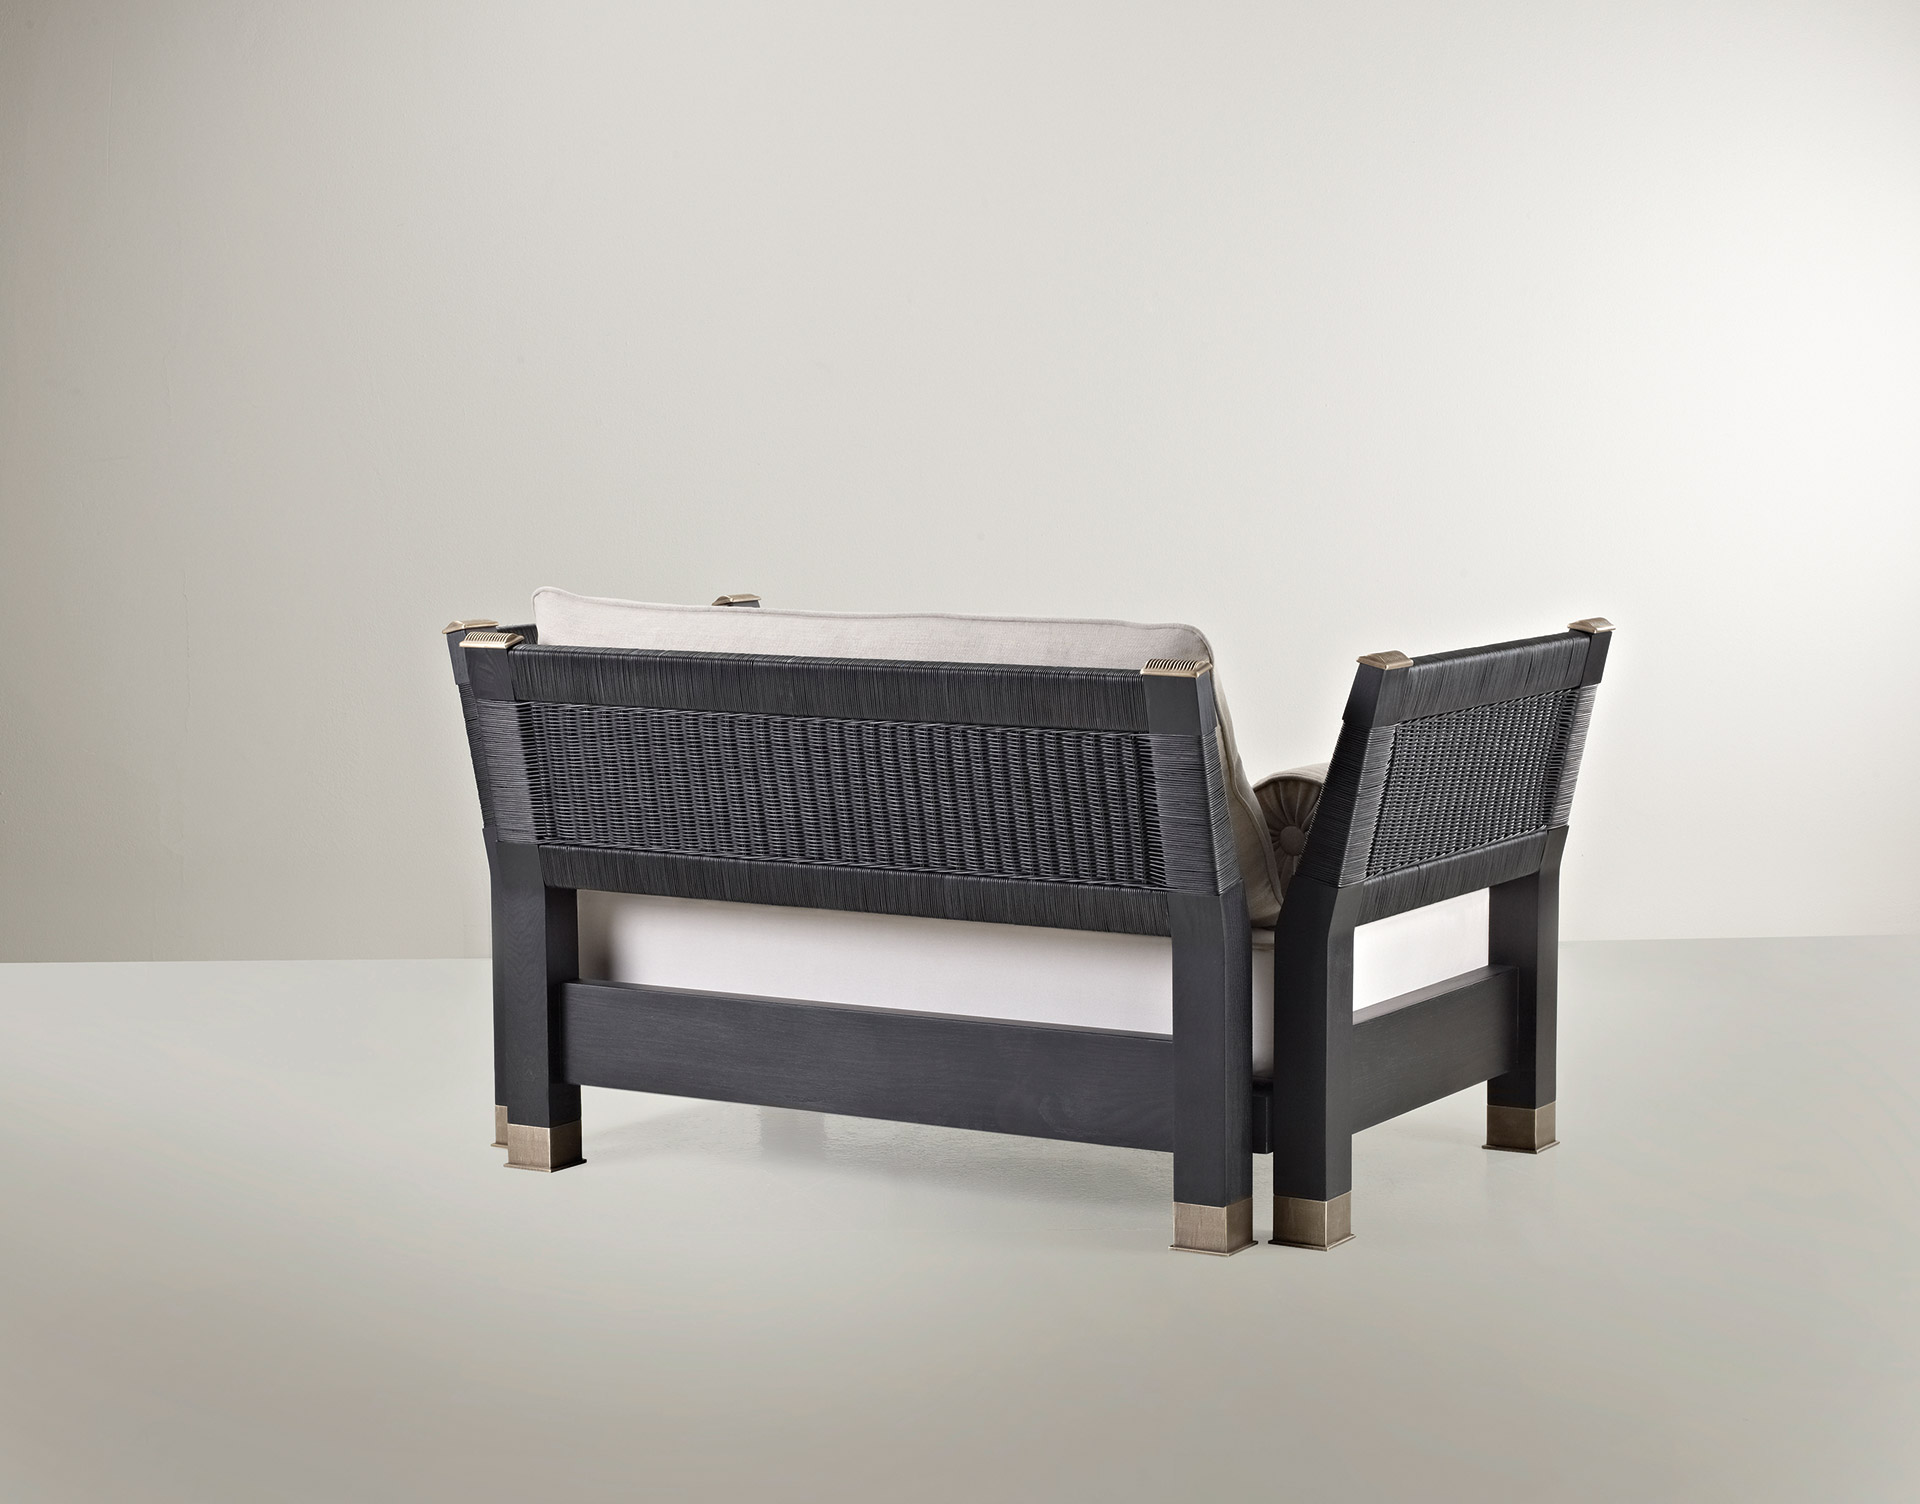 Moltrasio is an outdoor wooden sofa with bronze feet and details, from Promemoria's outdoor catalogue | Promemoria